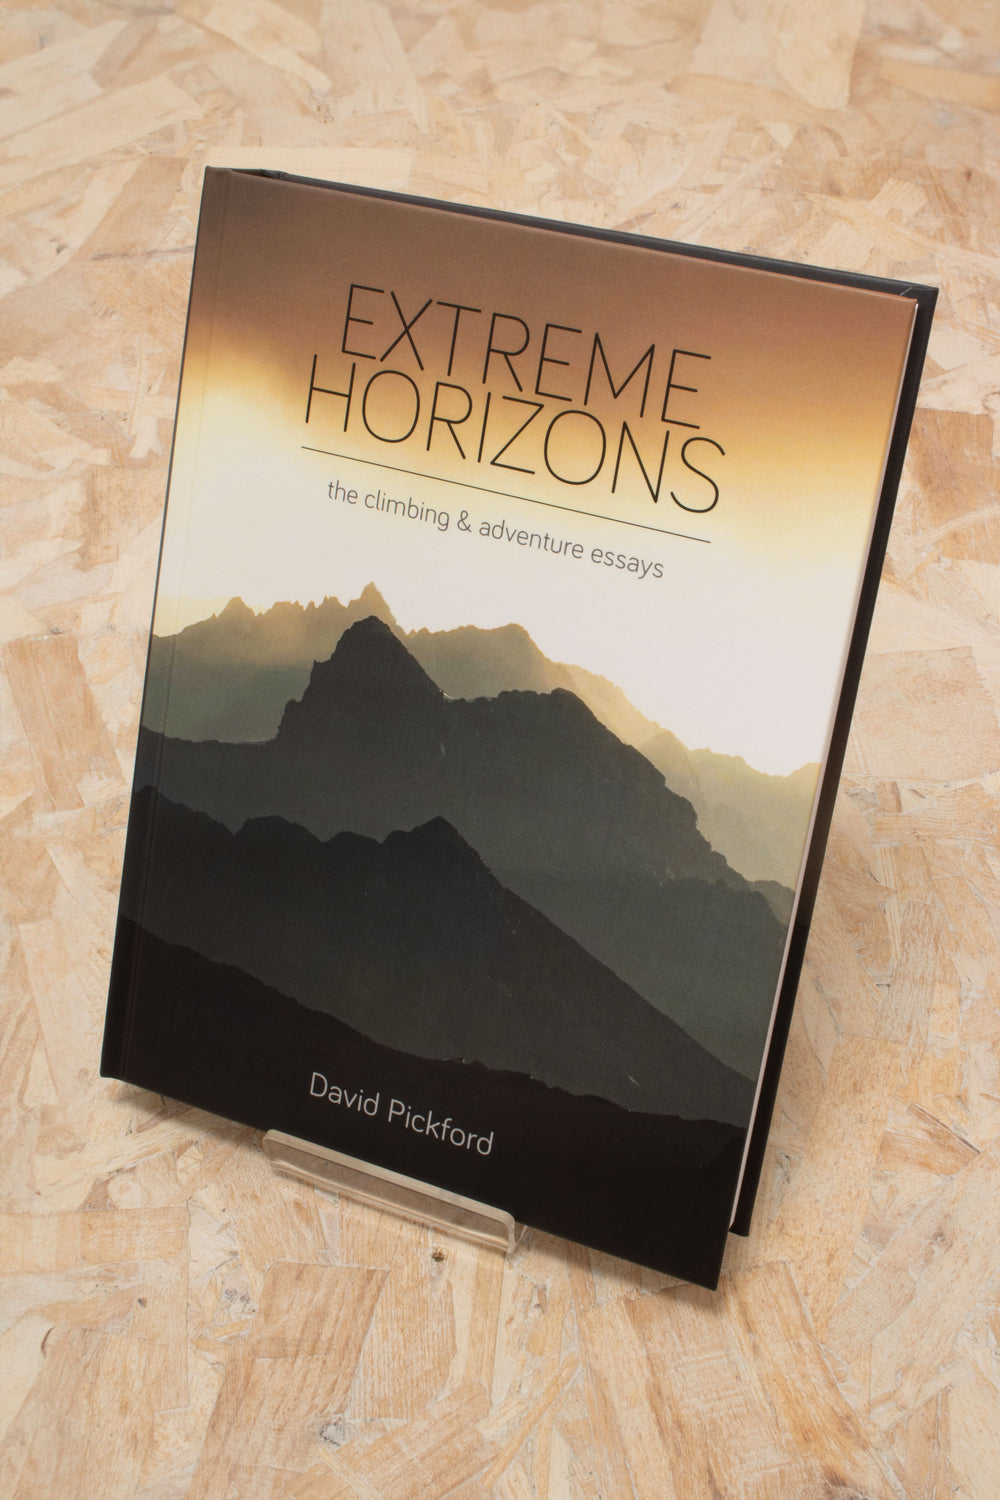 Extreme Horizons, The Climbing & Adventure Essays - By David Pickford